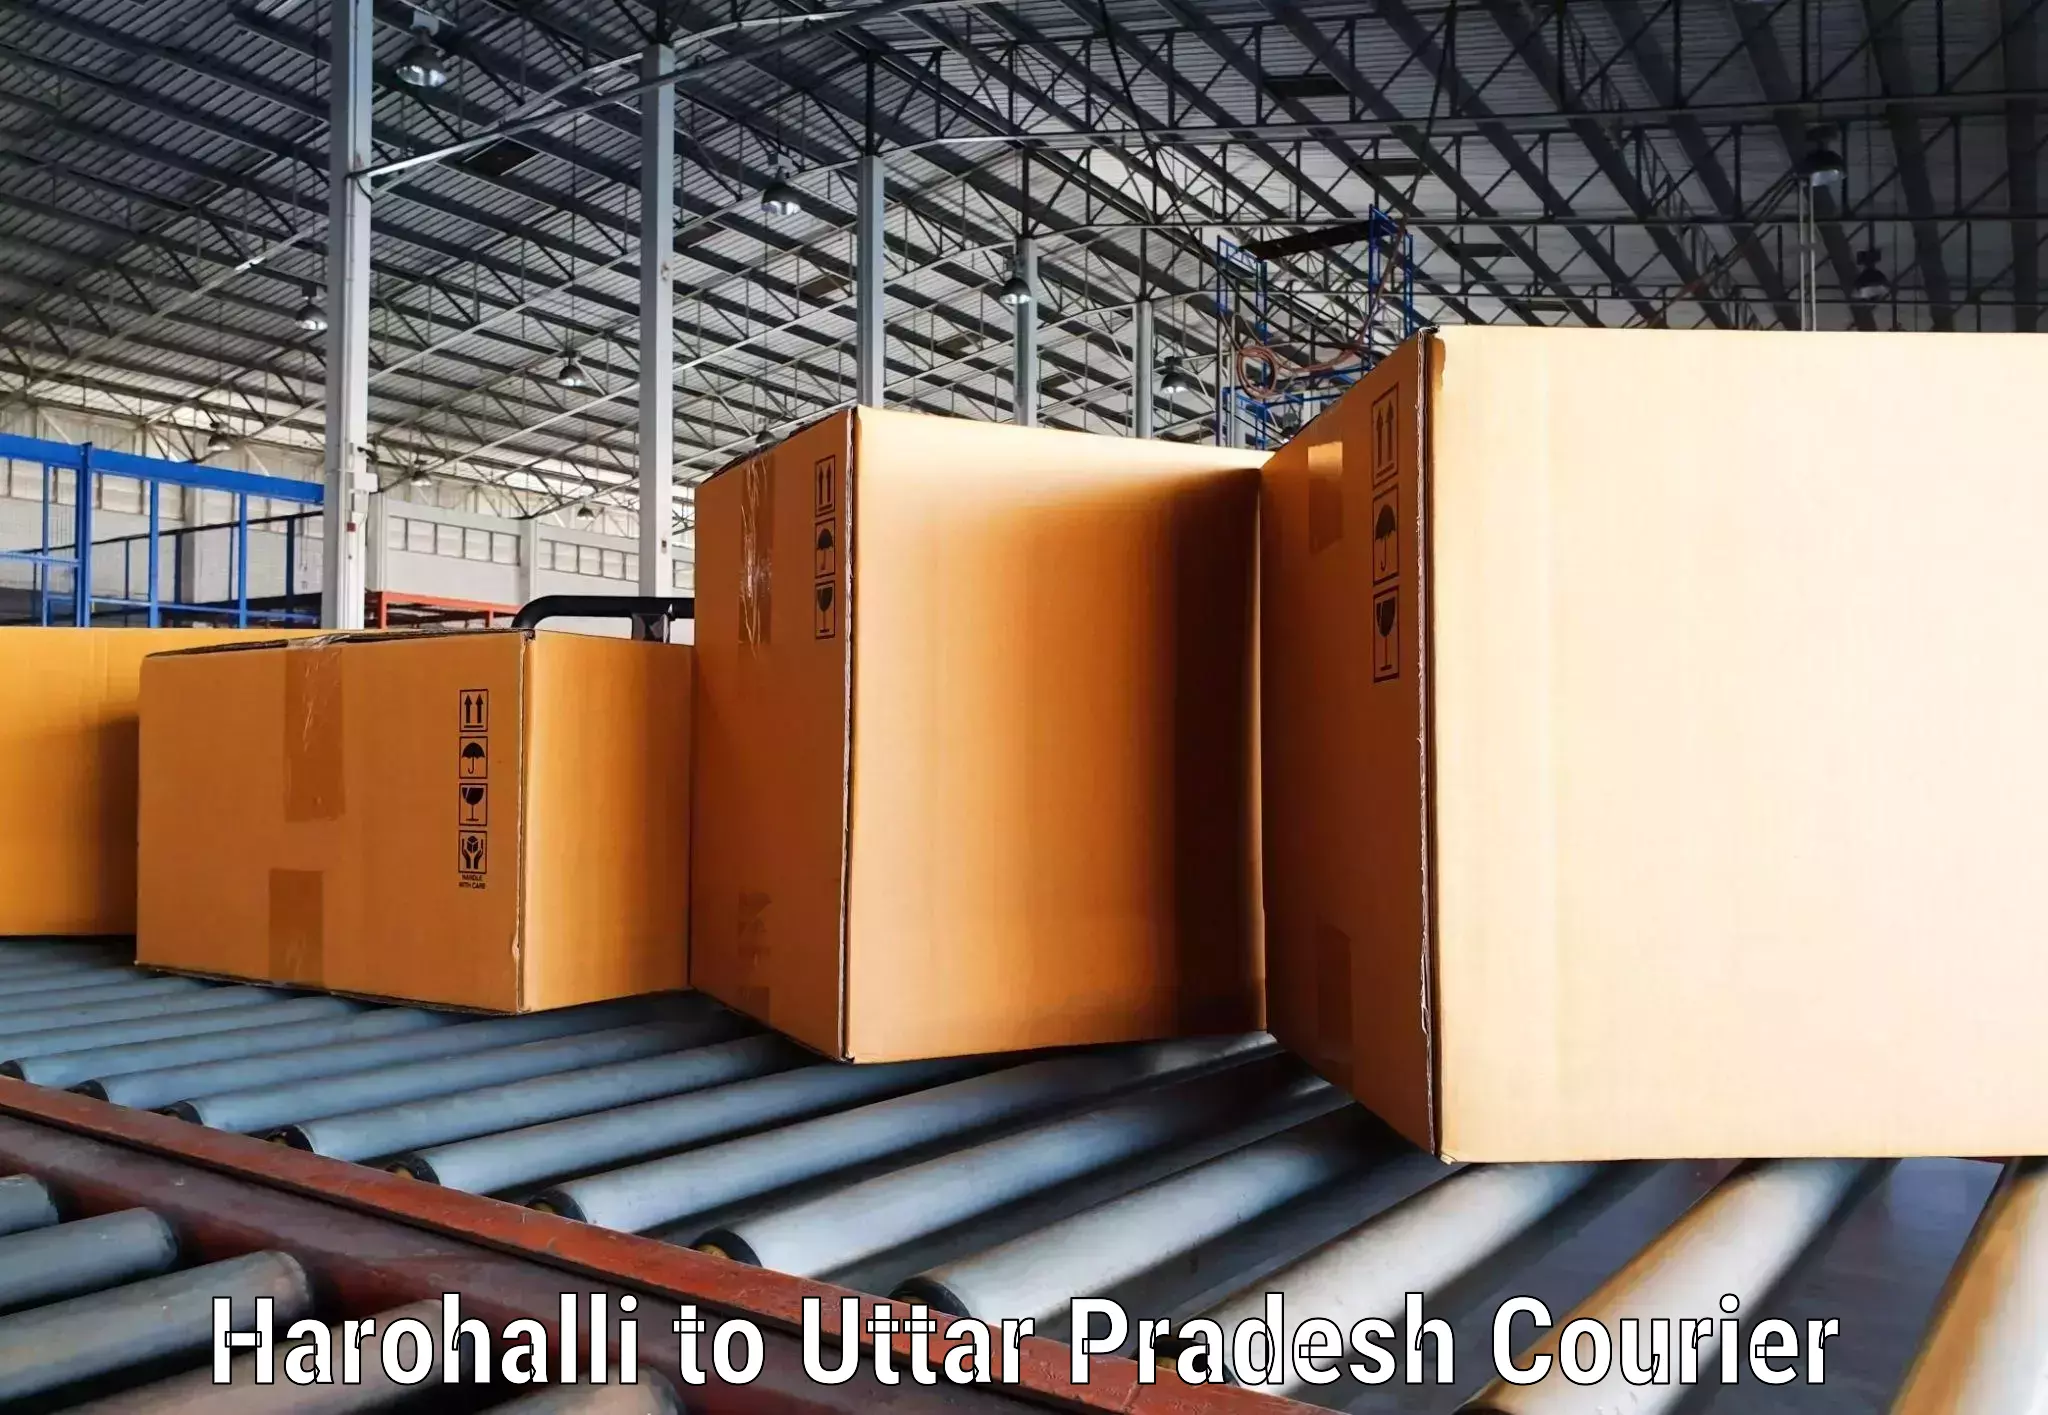 Dynamic courier operations in Harohalli to Meerut